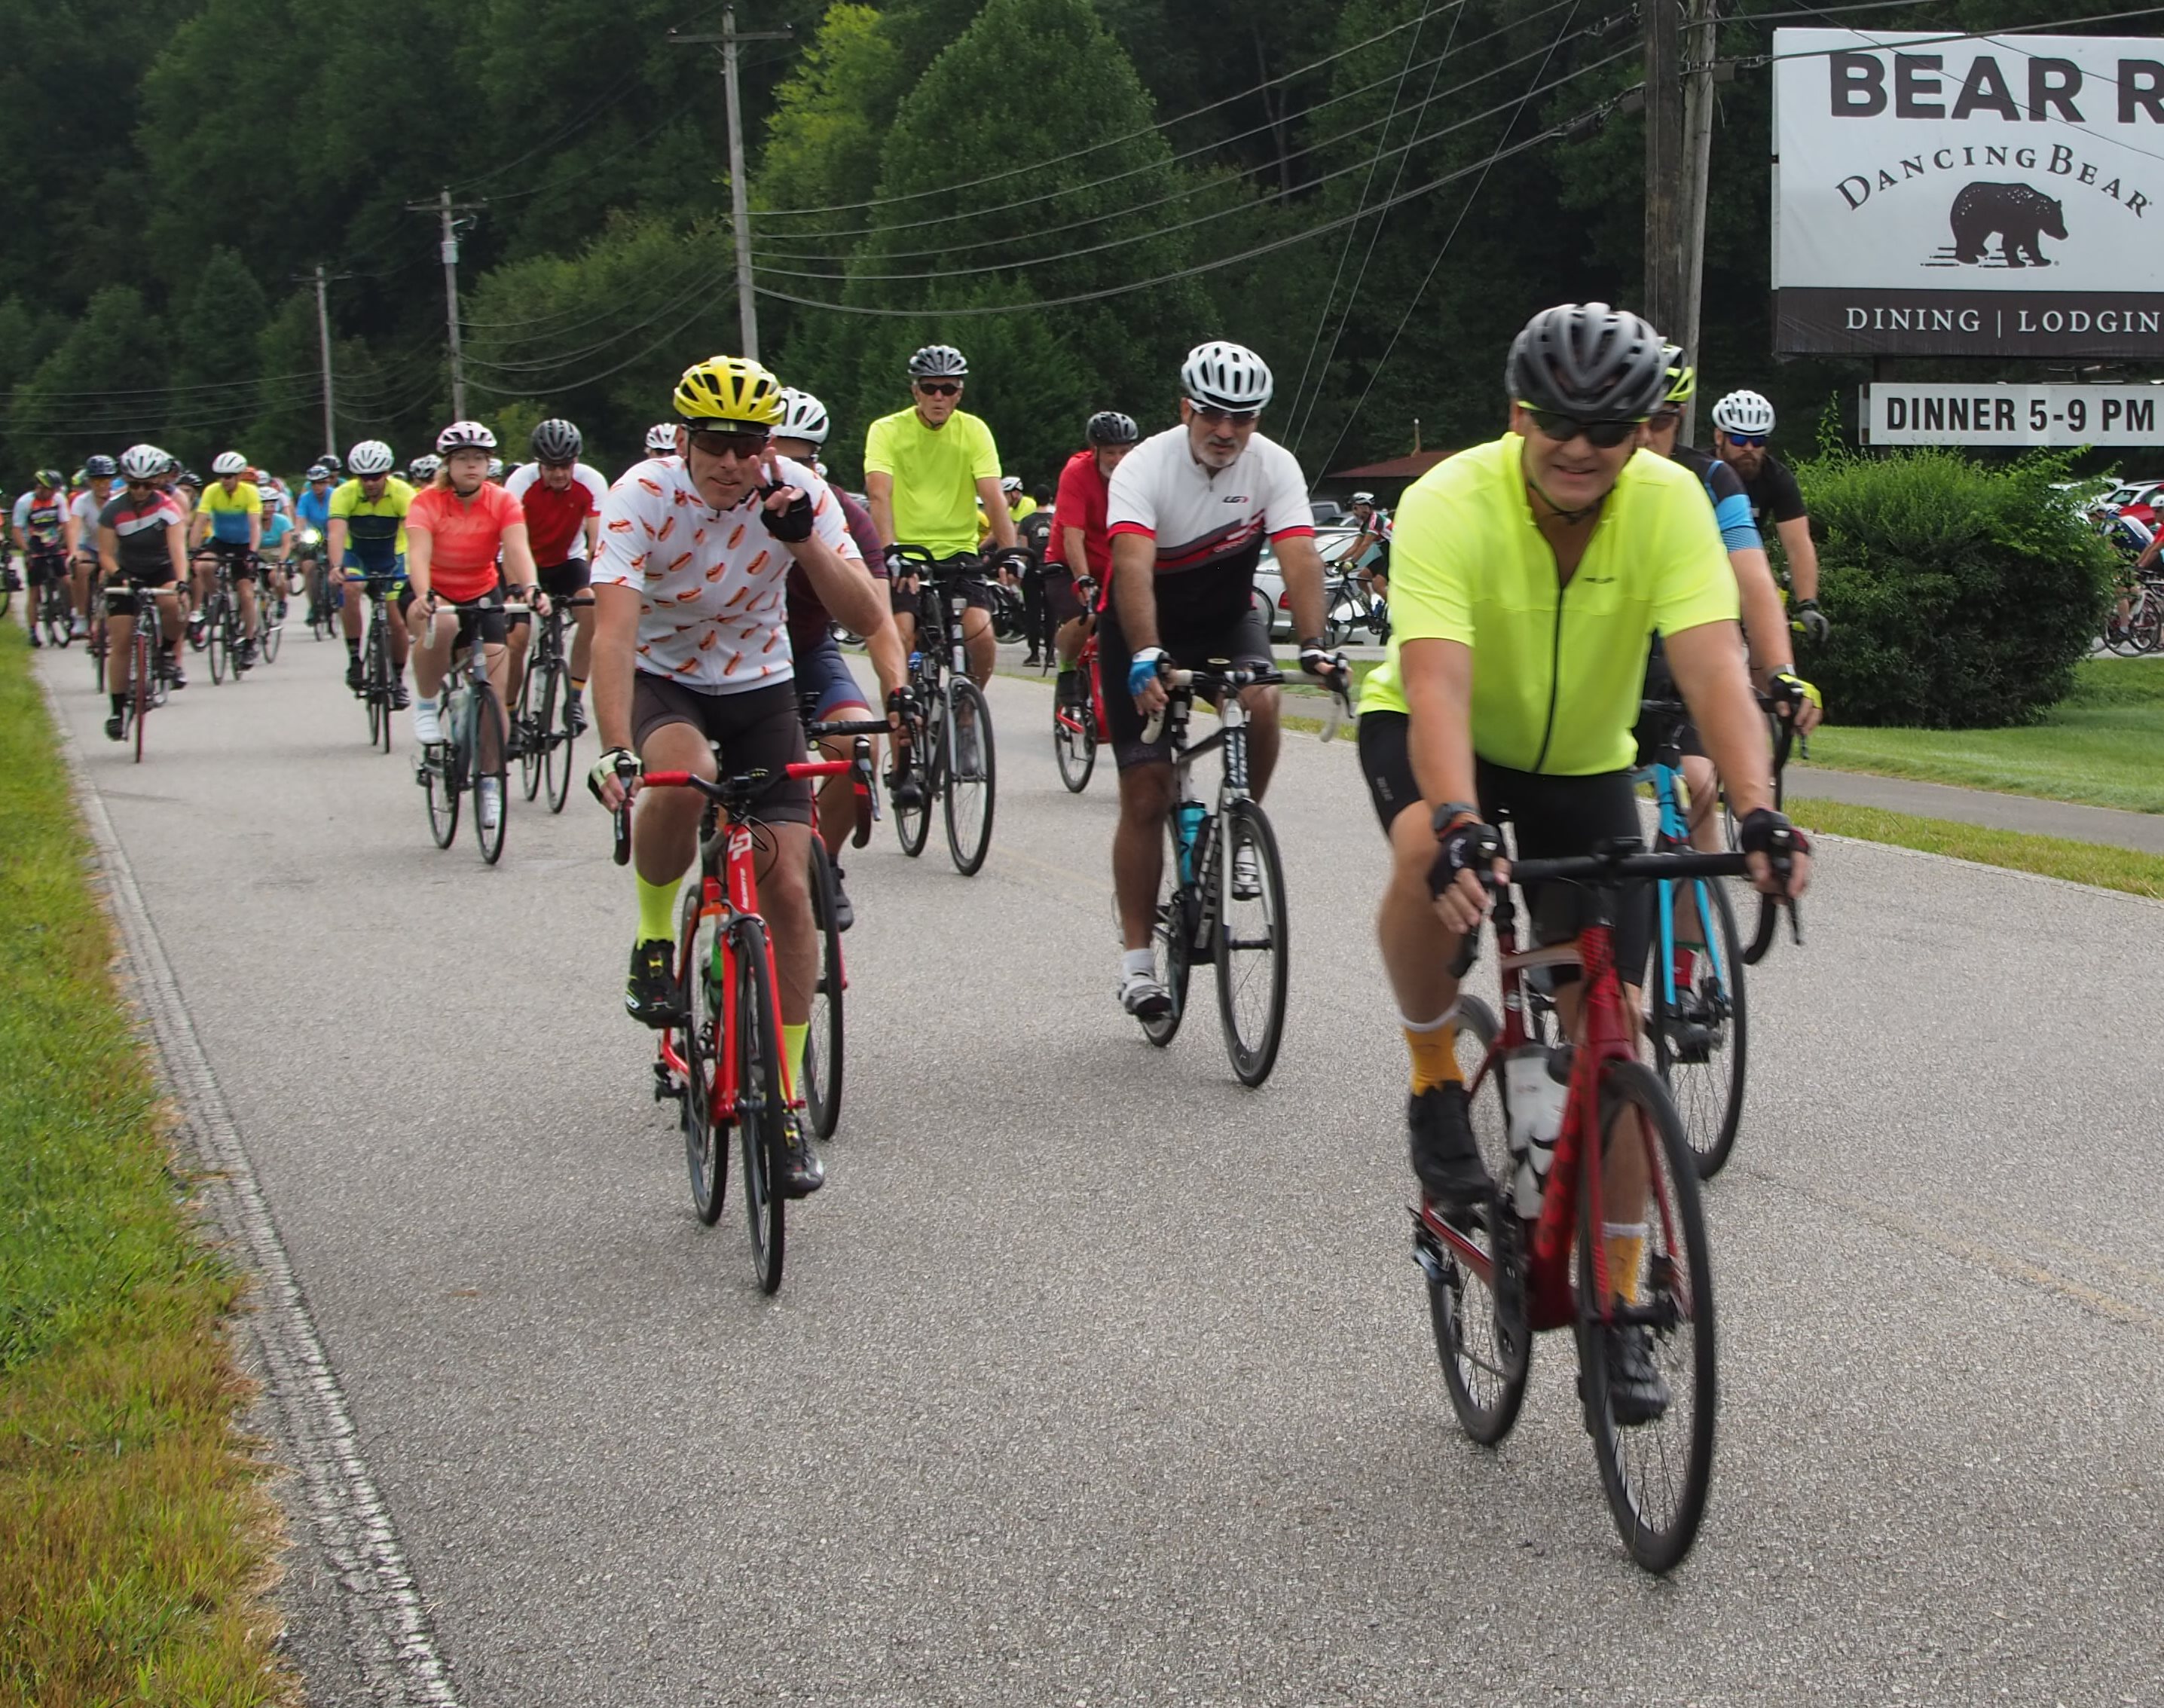 Cyclists at the 2021 Dancing Bear Bicycle Event